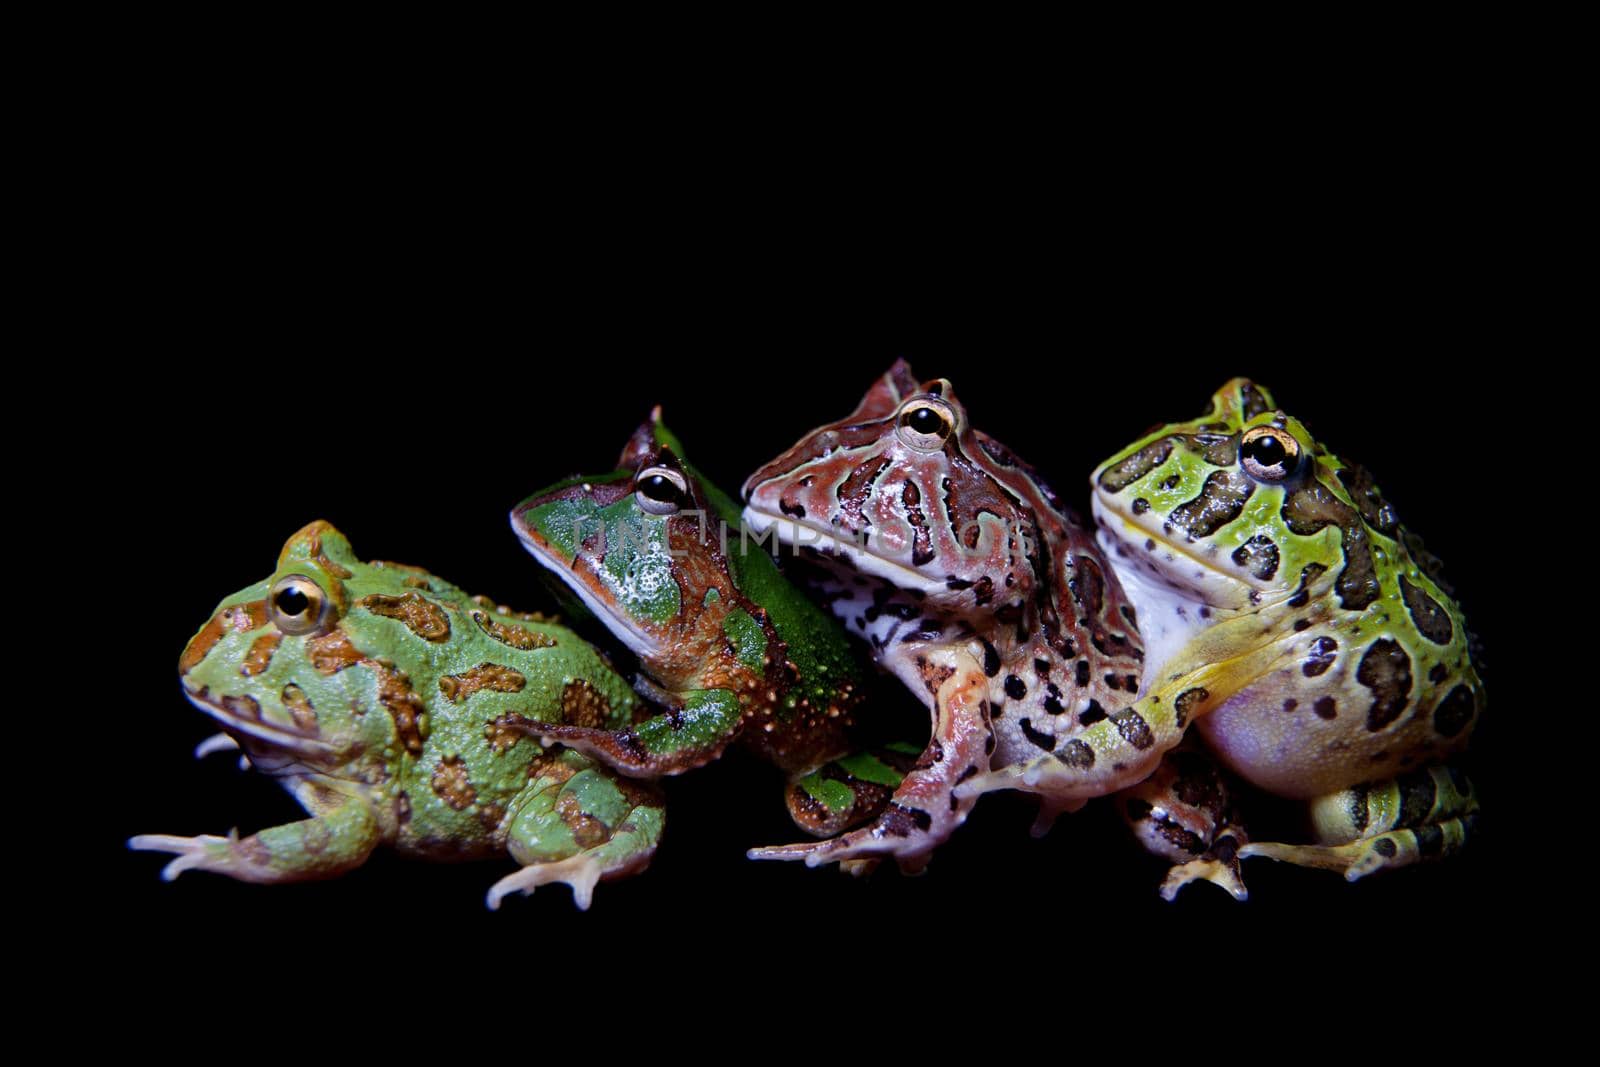 The pacman frogs isolated on black by RosaJay